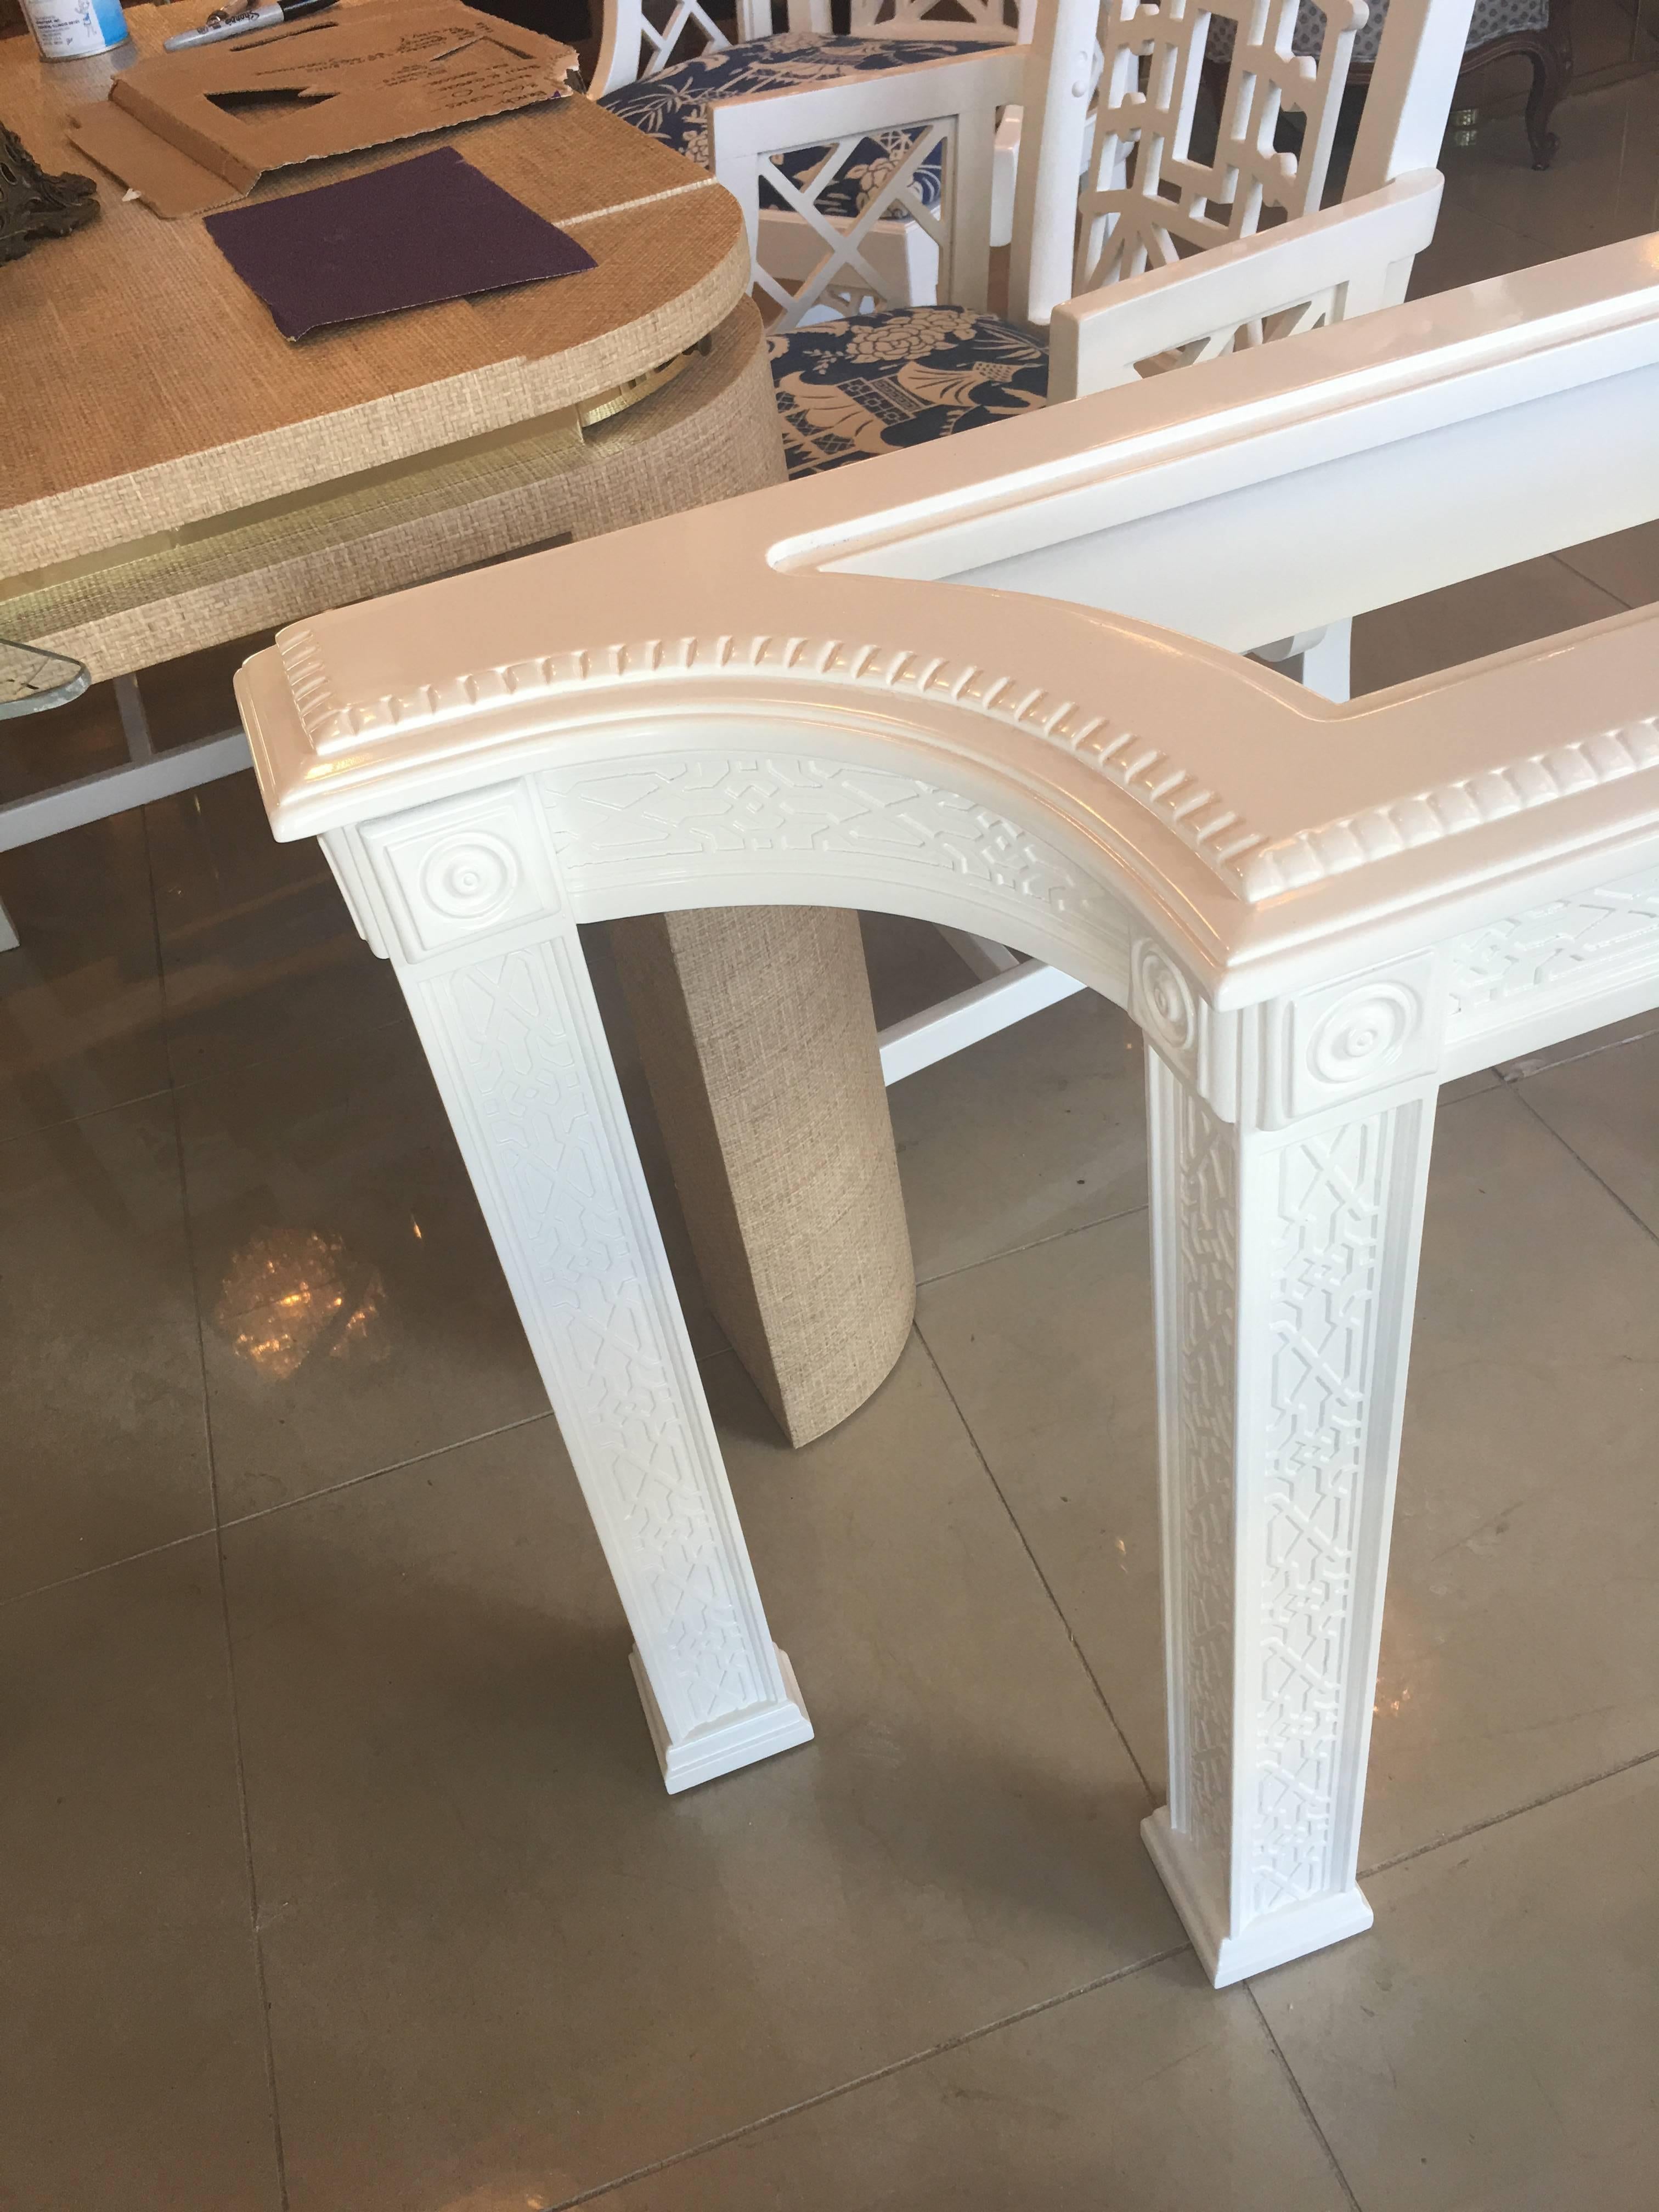 Vintage fretwork fret work console sofa table newly professionally lacquered in a white gloss with new glass top insert (not pictured but will be included).